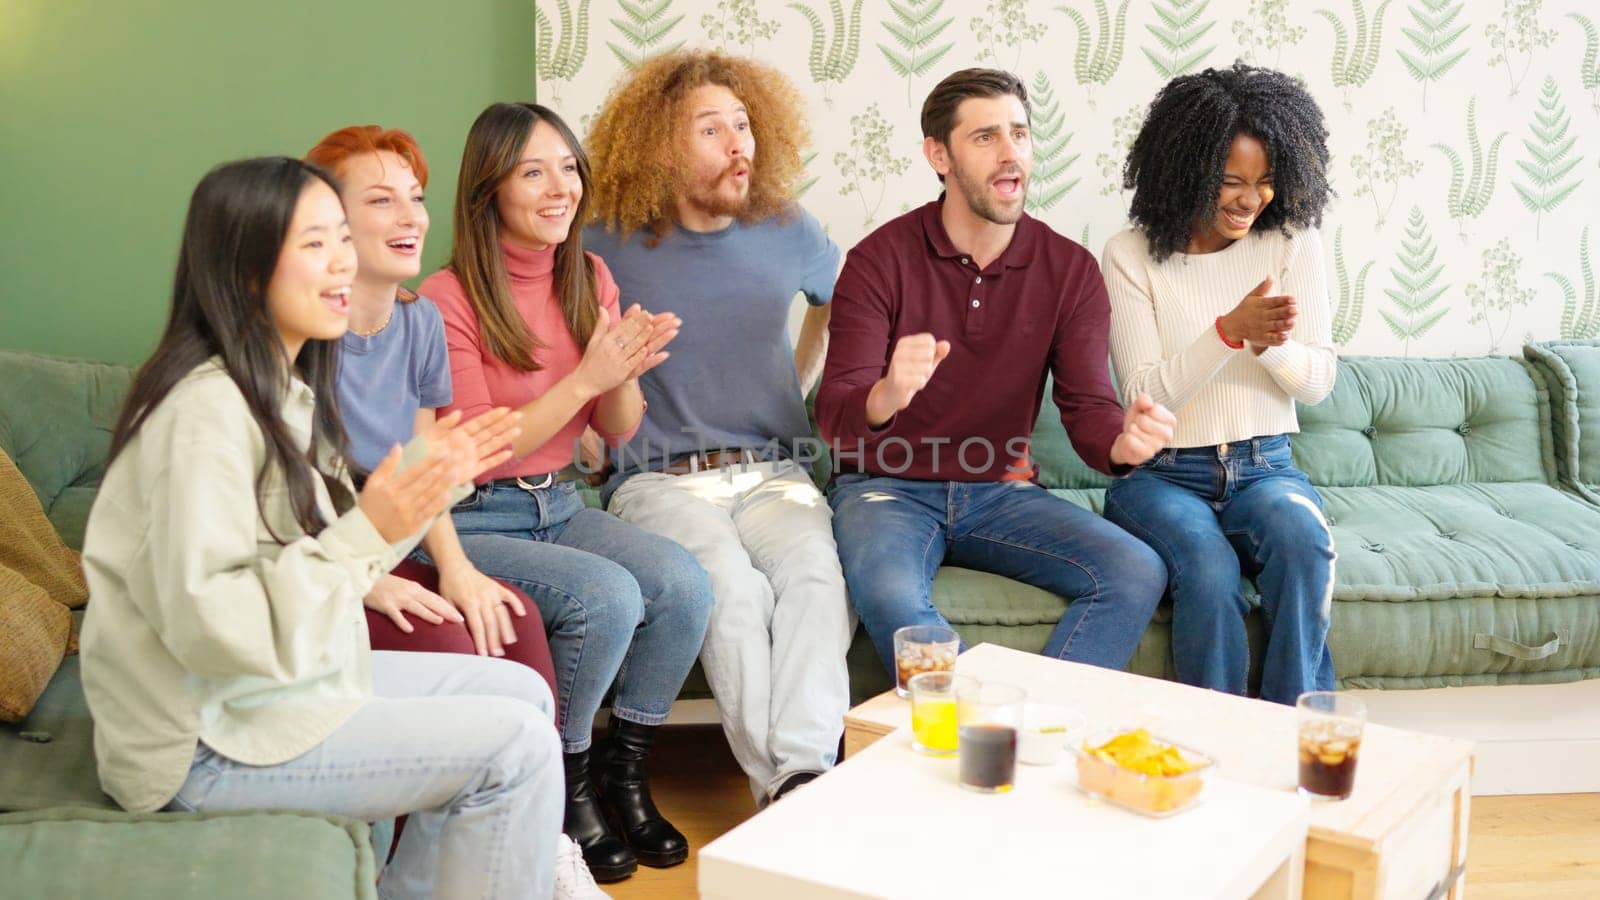 Group of friends celebrating something they are watching on TV by ivanmoreno